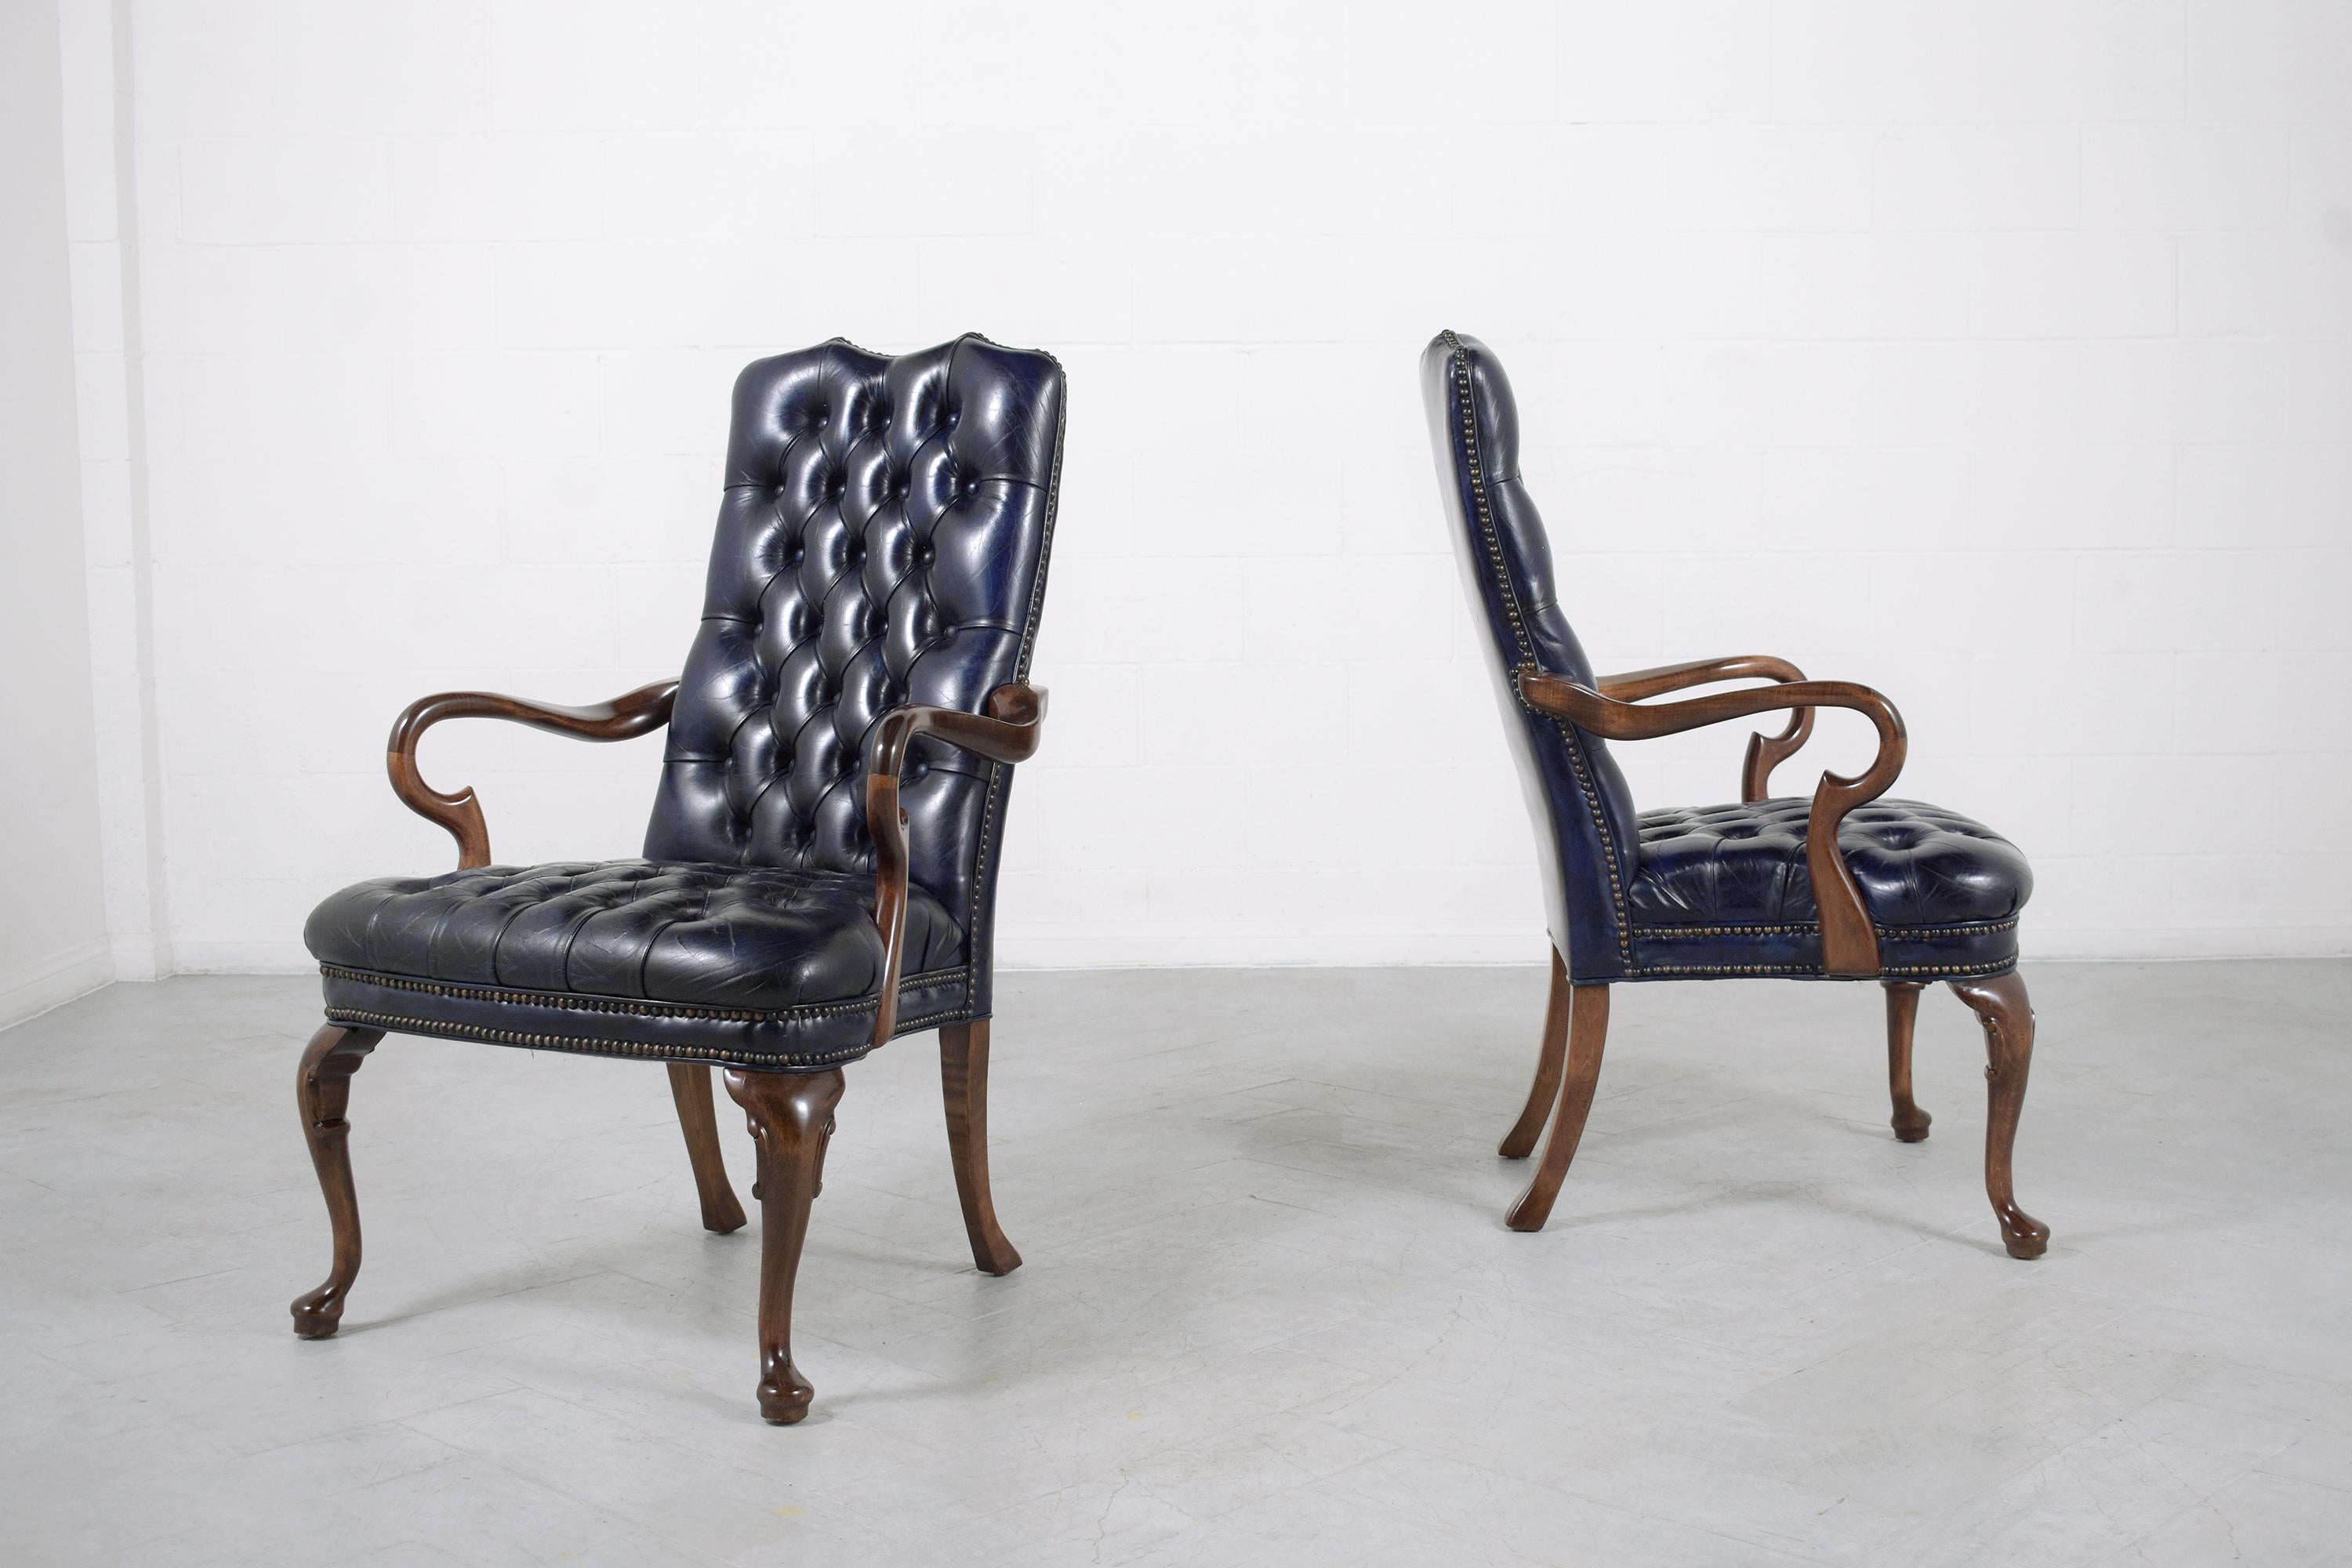 An extraordinary pair of chesterfield executive armchairs handcrafted out of mahogany wood in great condition and are newly restored and refinished by our professional craftsmen team. This elegant pair is eye-catching and features a carved scroll